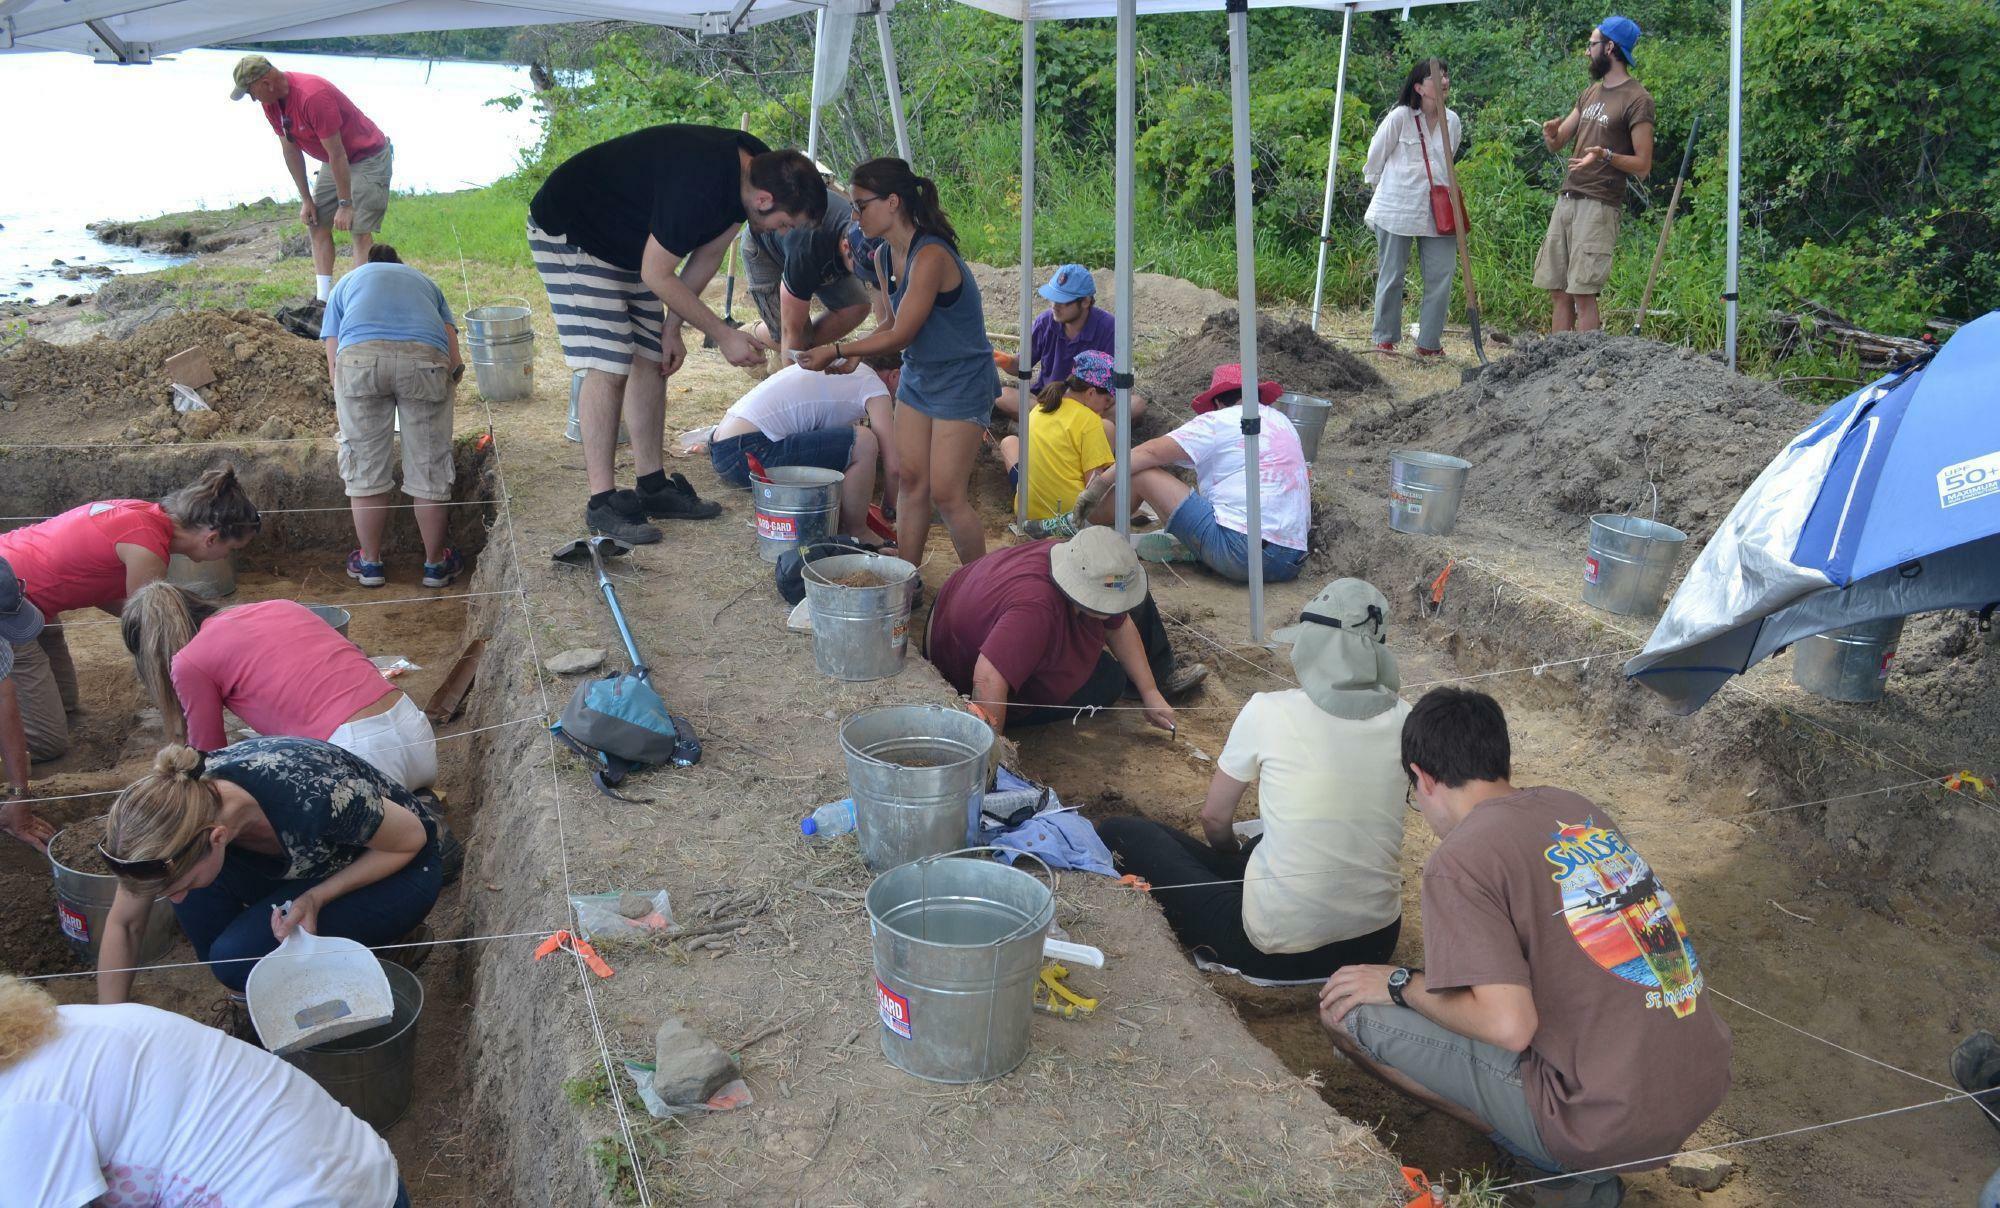 People engaged in archaeological digs by the shore of the Ottawa River.